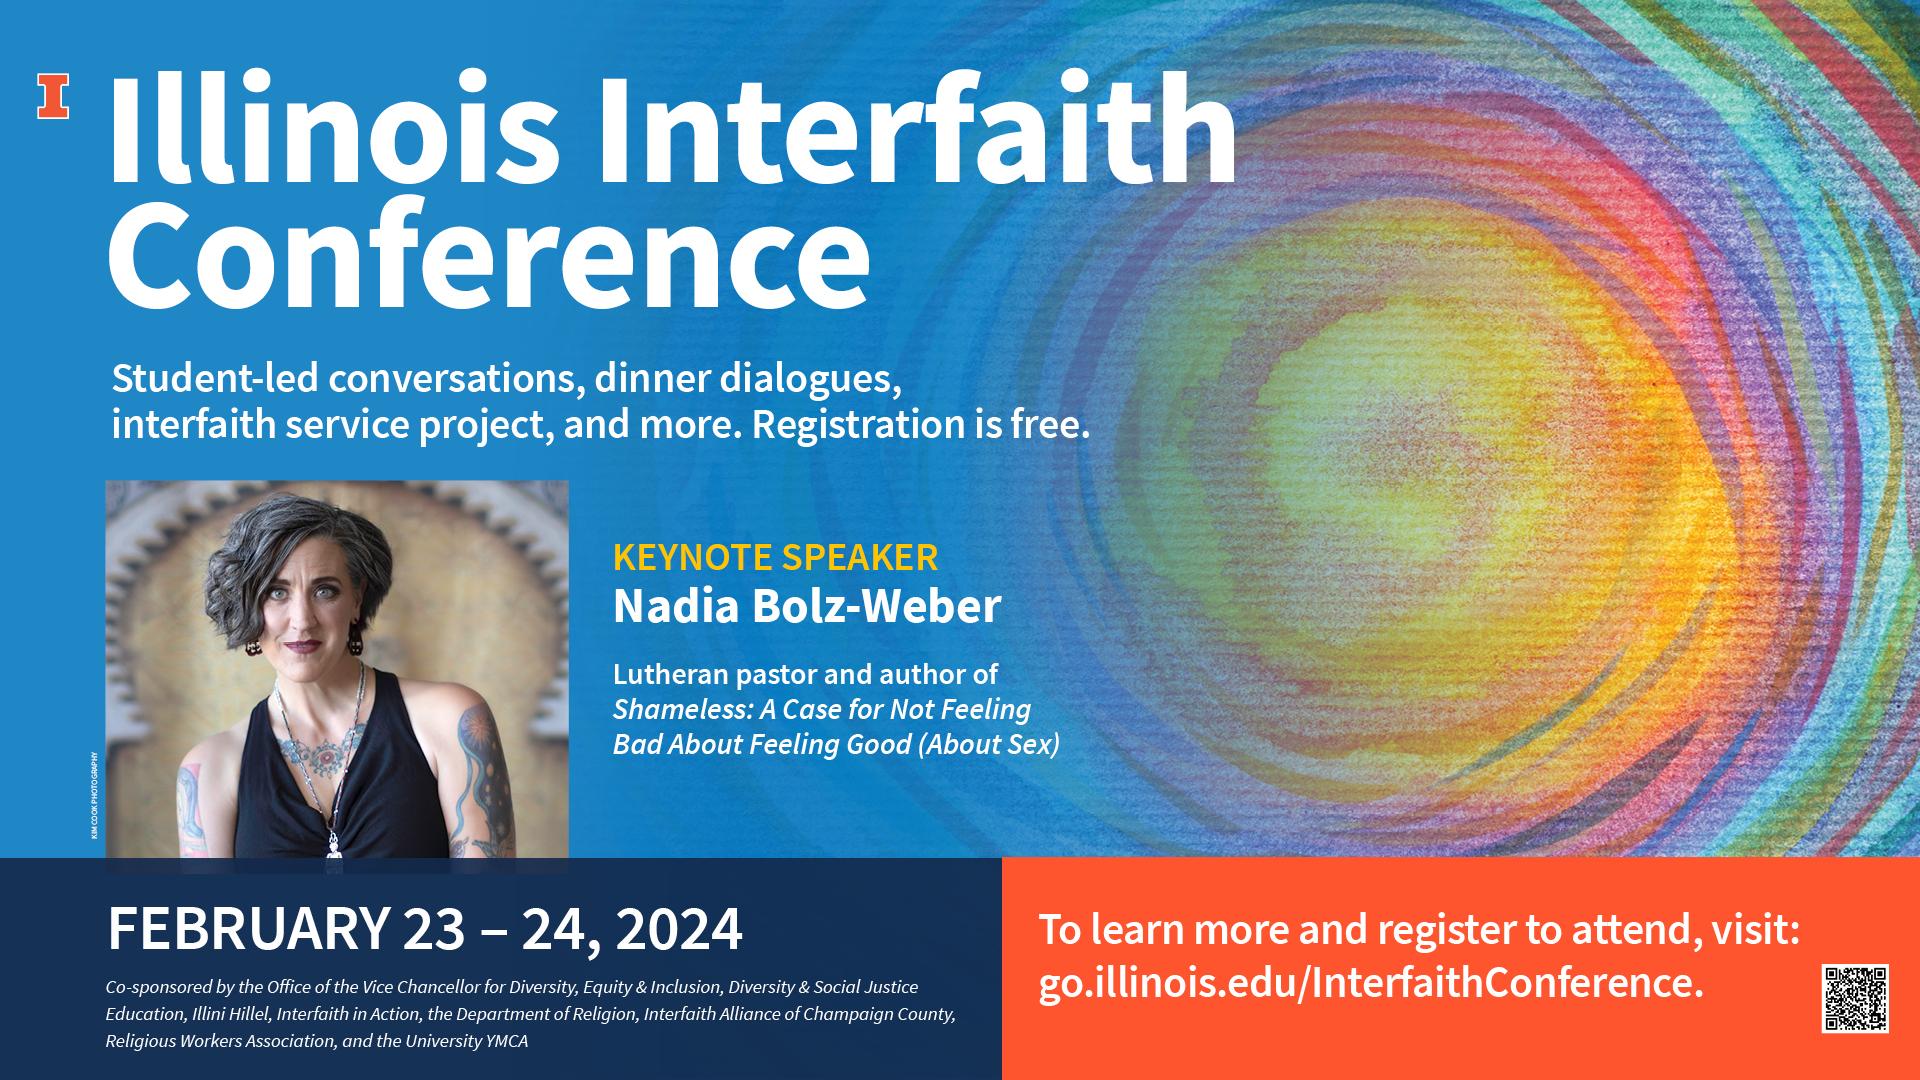 Illinois Interfaith Conference promotional flyer with description and dates.